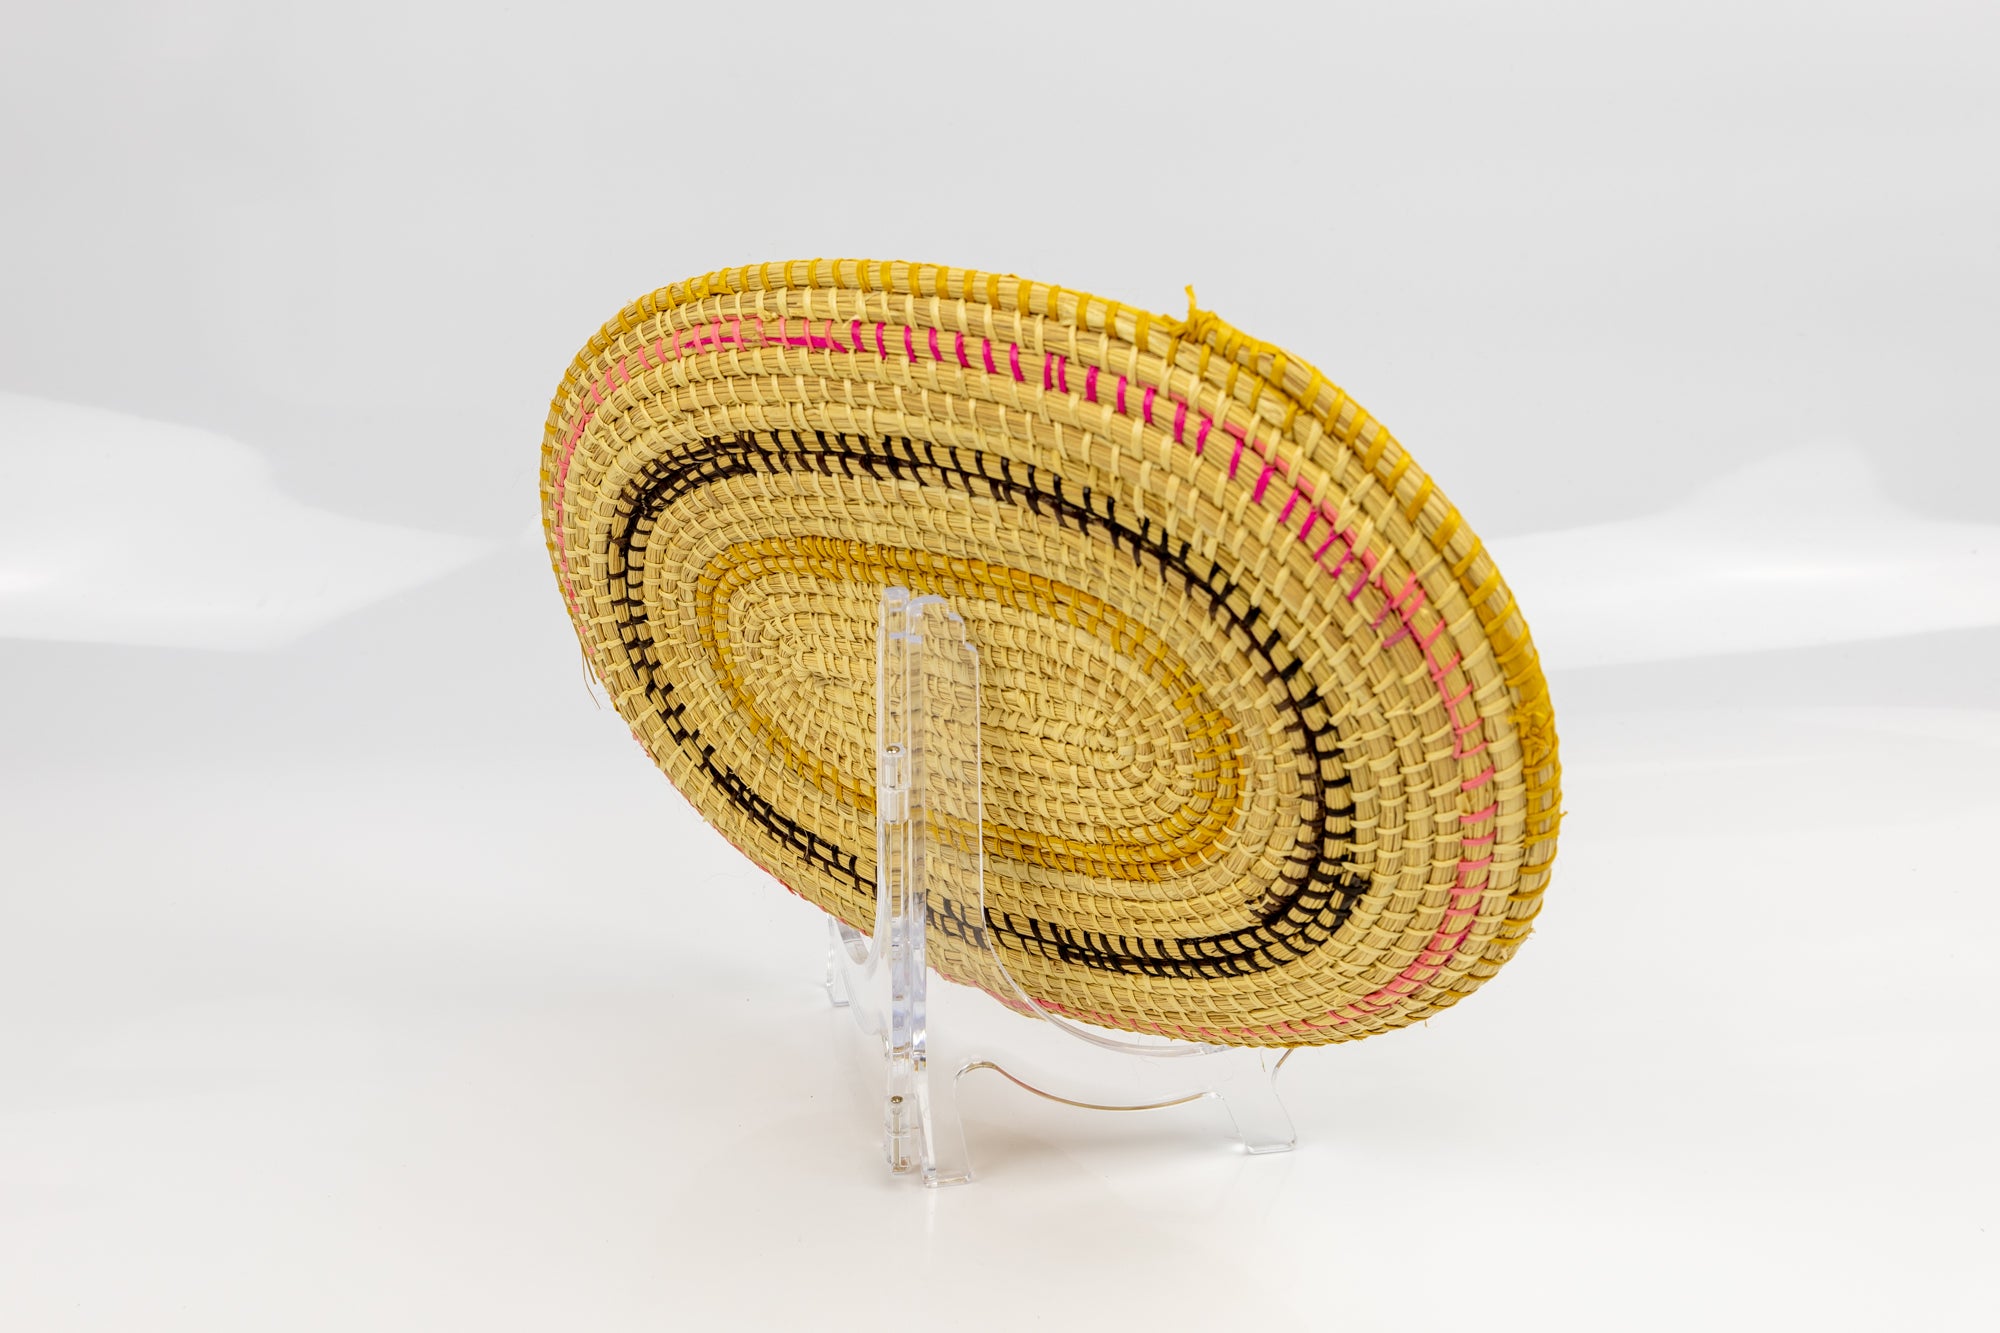 Pink, gold, brown and white. Oval design. Hand woven plate basket. Made in Panama.